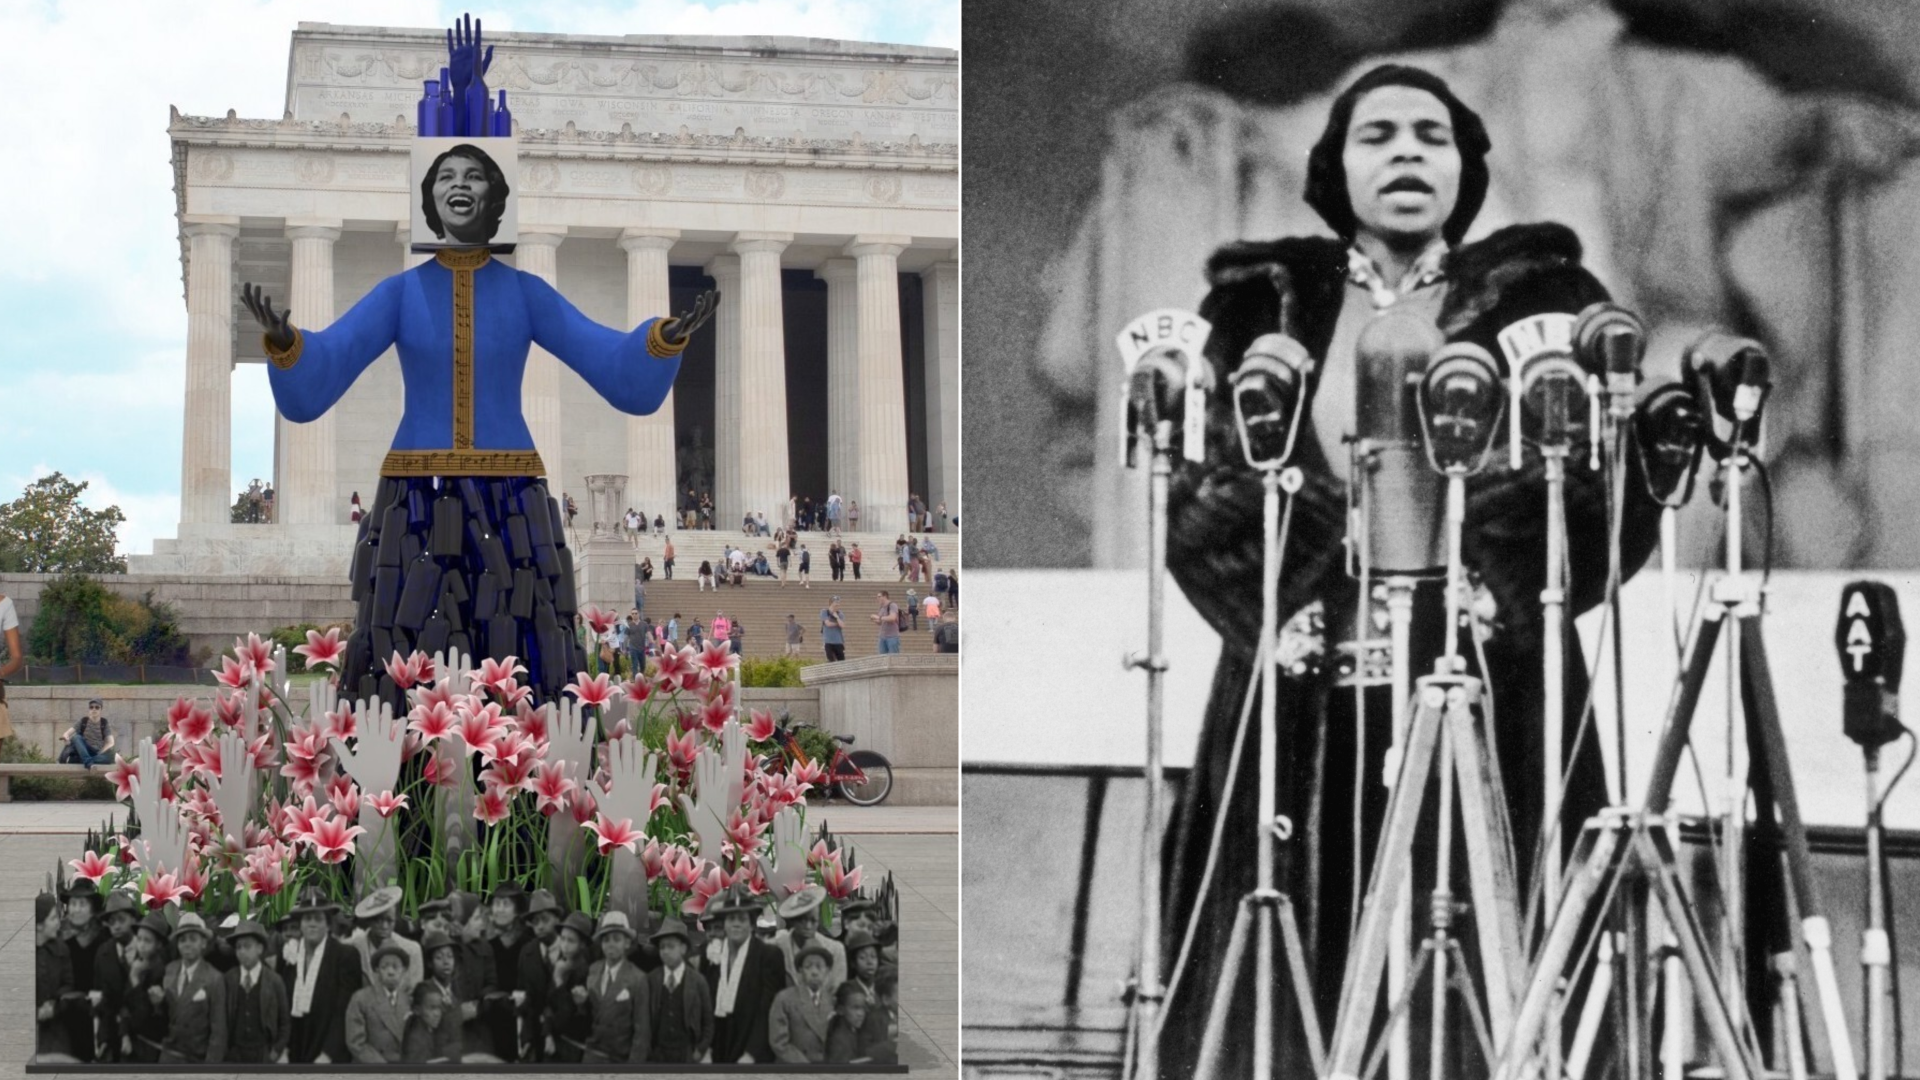 A statue of Black opera star Marian Anderson at the Lincoln Memorial (left) and Marian Anderson's 1939 performance at the Lincoln Memorial (right)